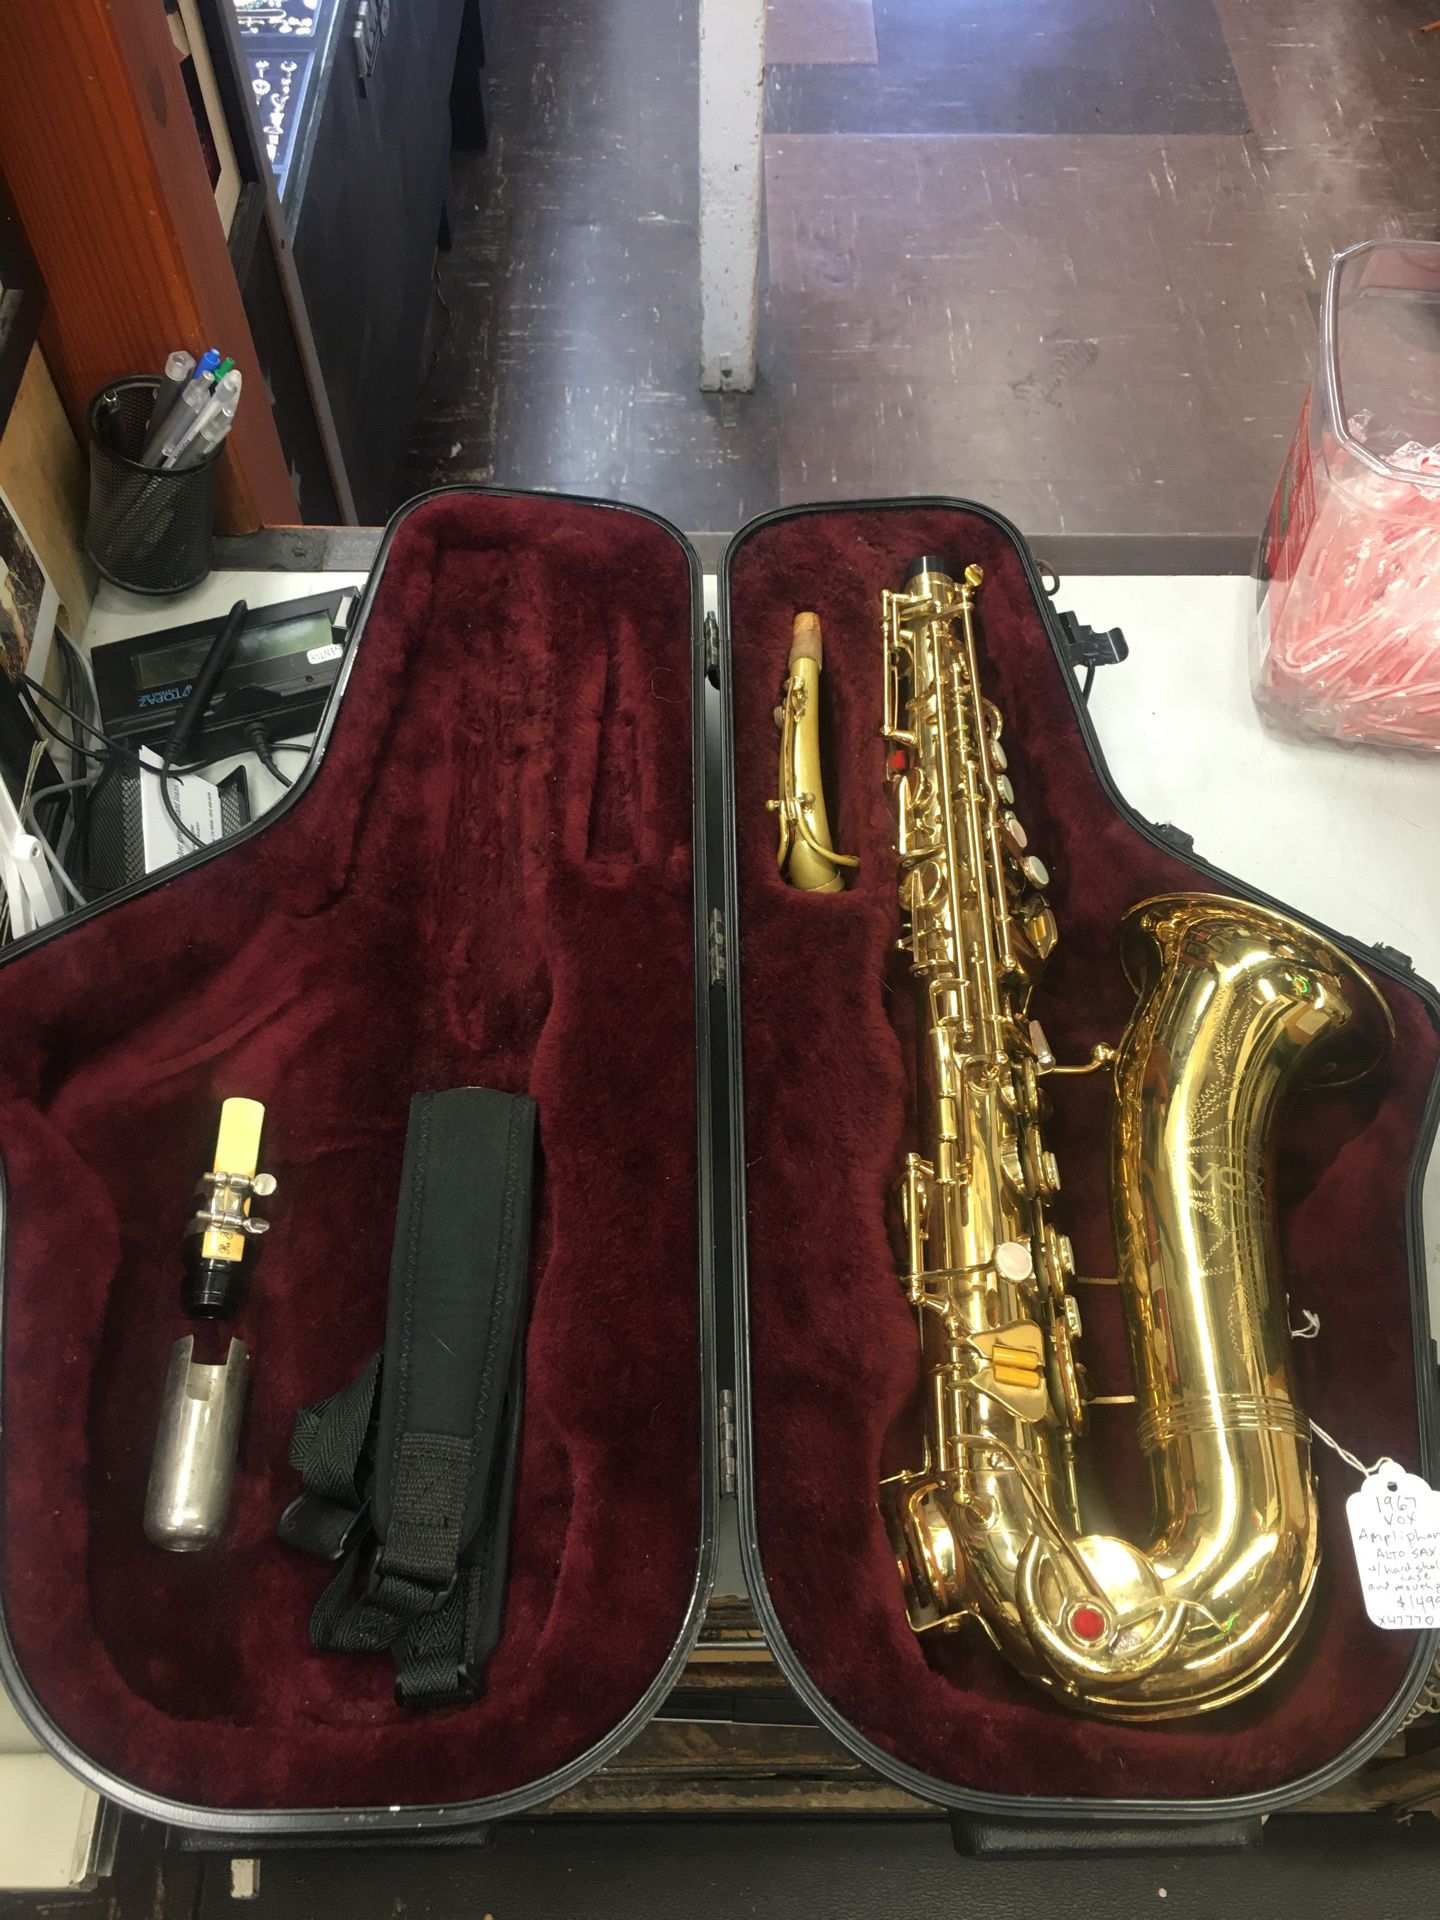 1967 Vox Ampliphonic Alto Saxophone with Hard Case and Mouthpiece